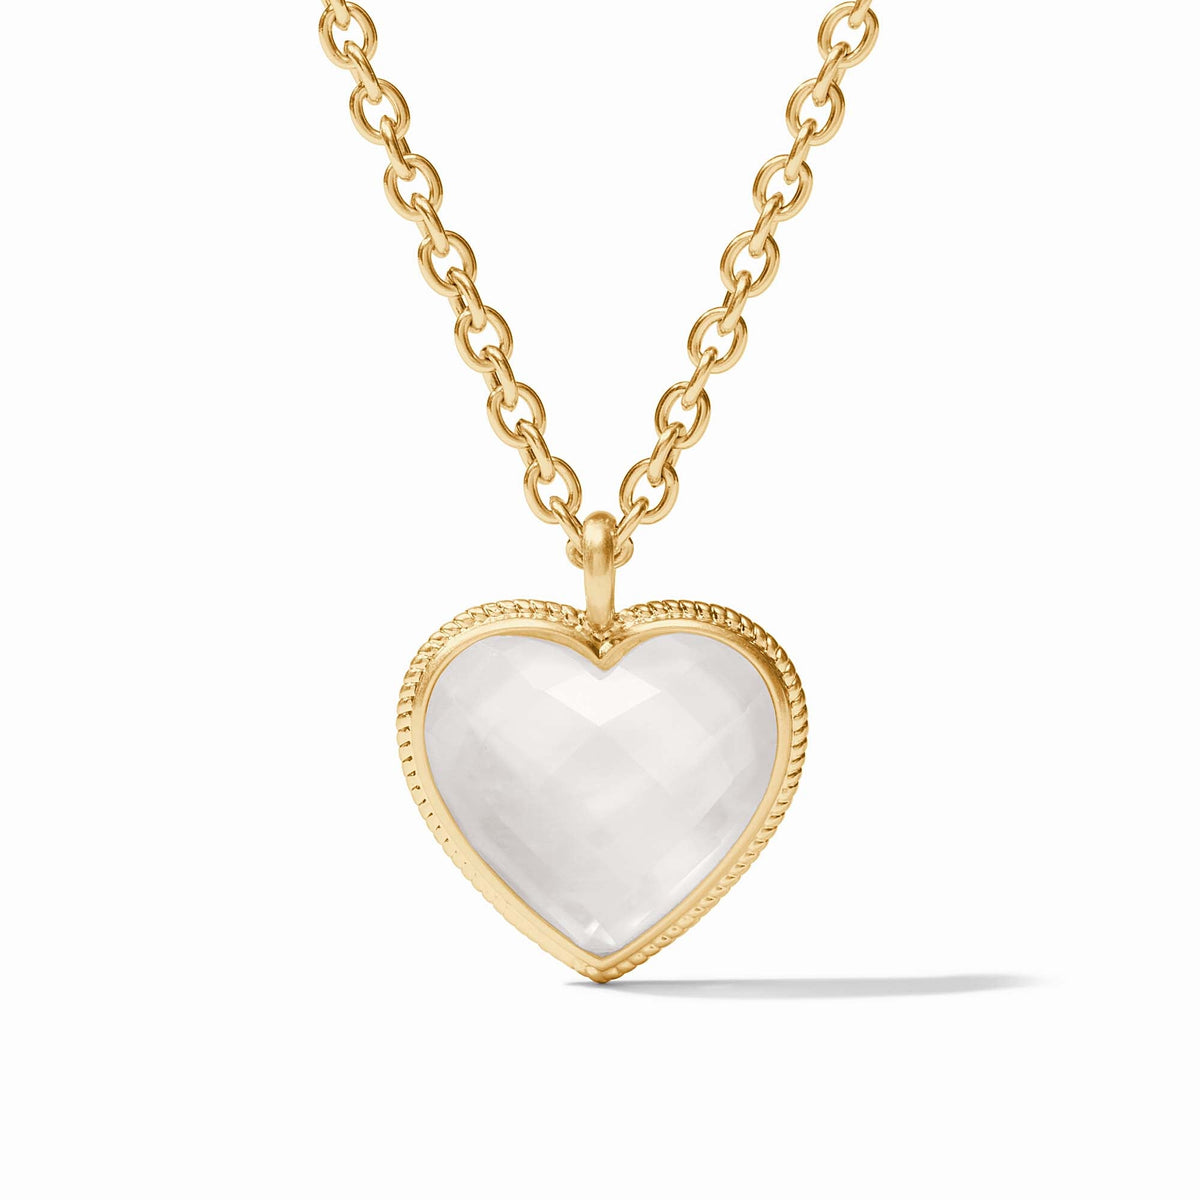 Julie Vos - Heart Pendant, Iridescent Clear Crystal